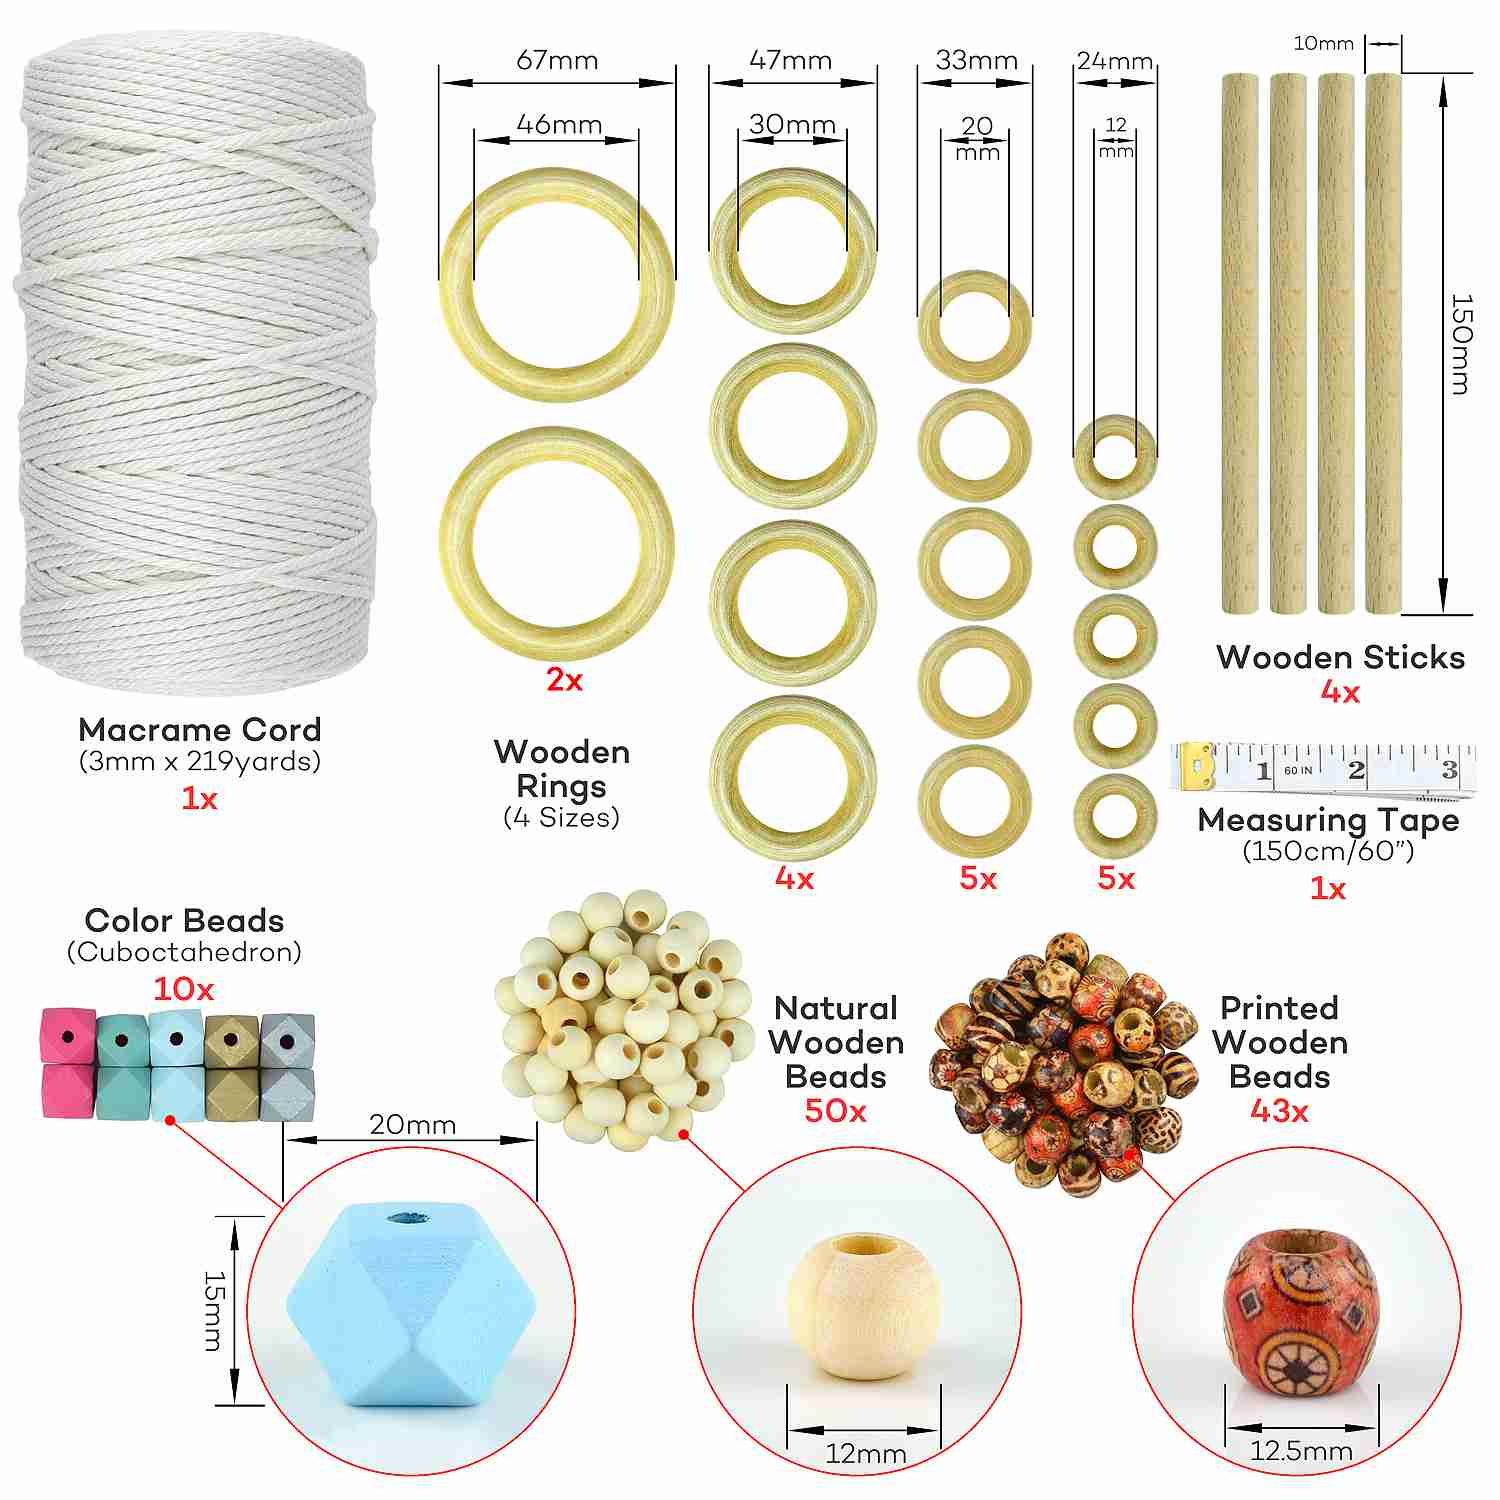 macrame-kits-for-adults-beginners-3mm-x-220yards for cheap